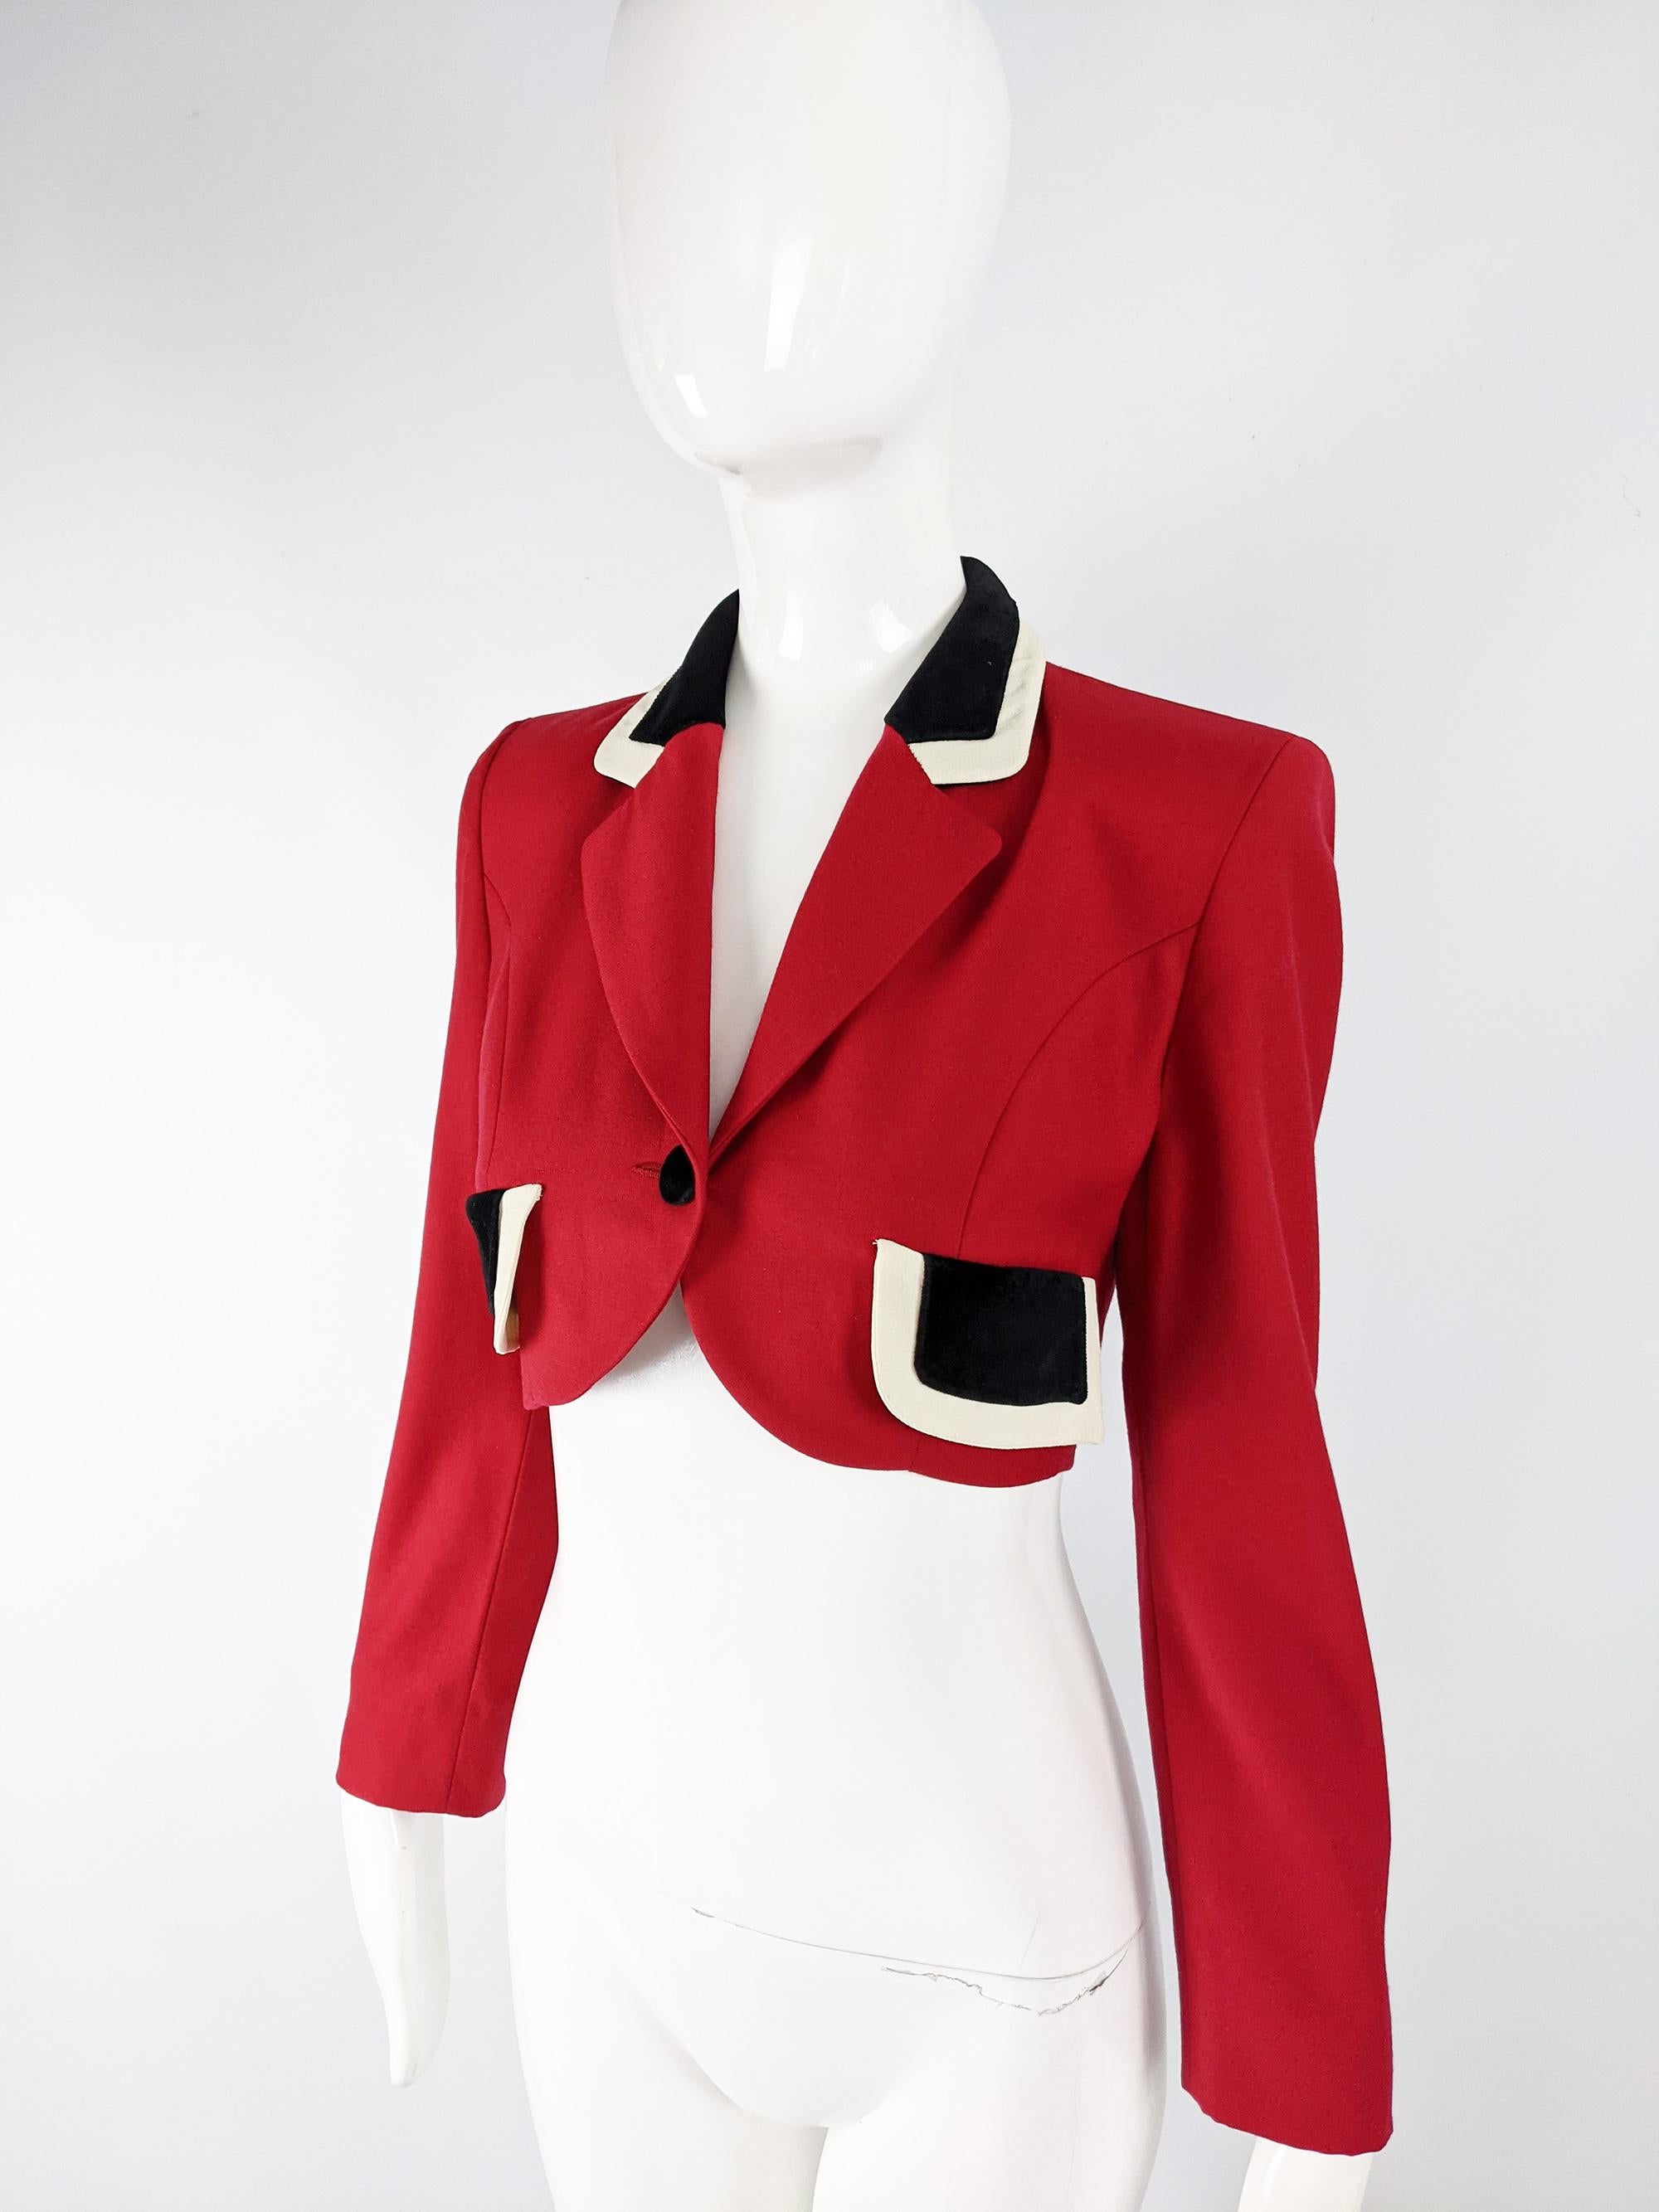 Moschino Vintage Red Crepe Crop Jacket In Good Condition For Sale In Doncaster, South Yorkshire